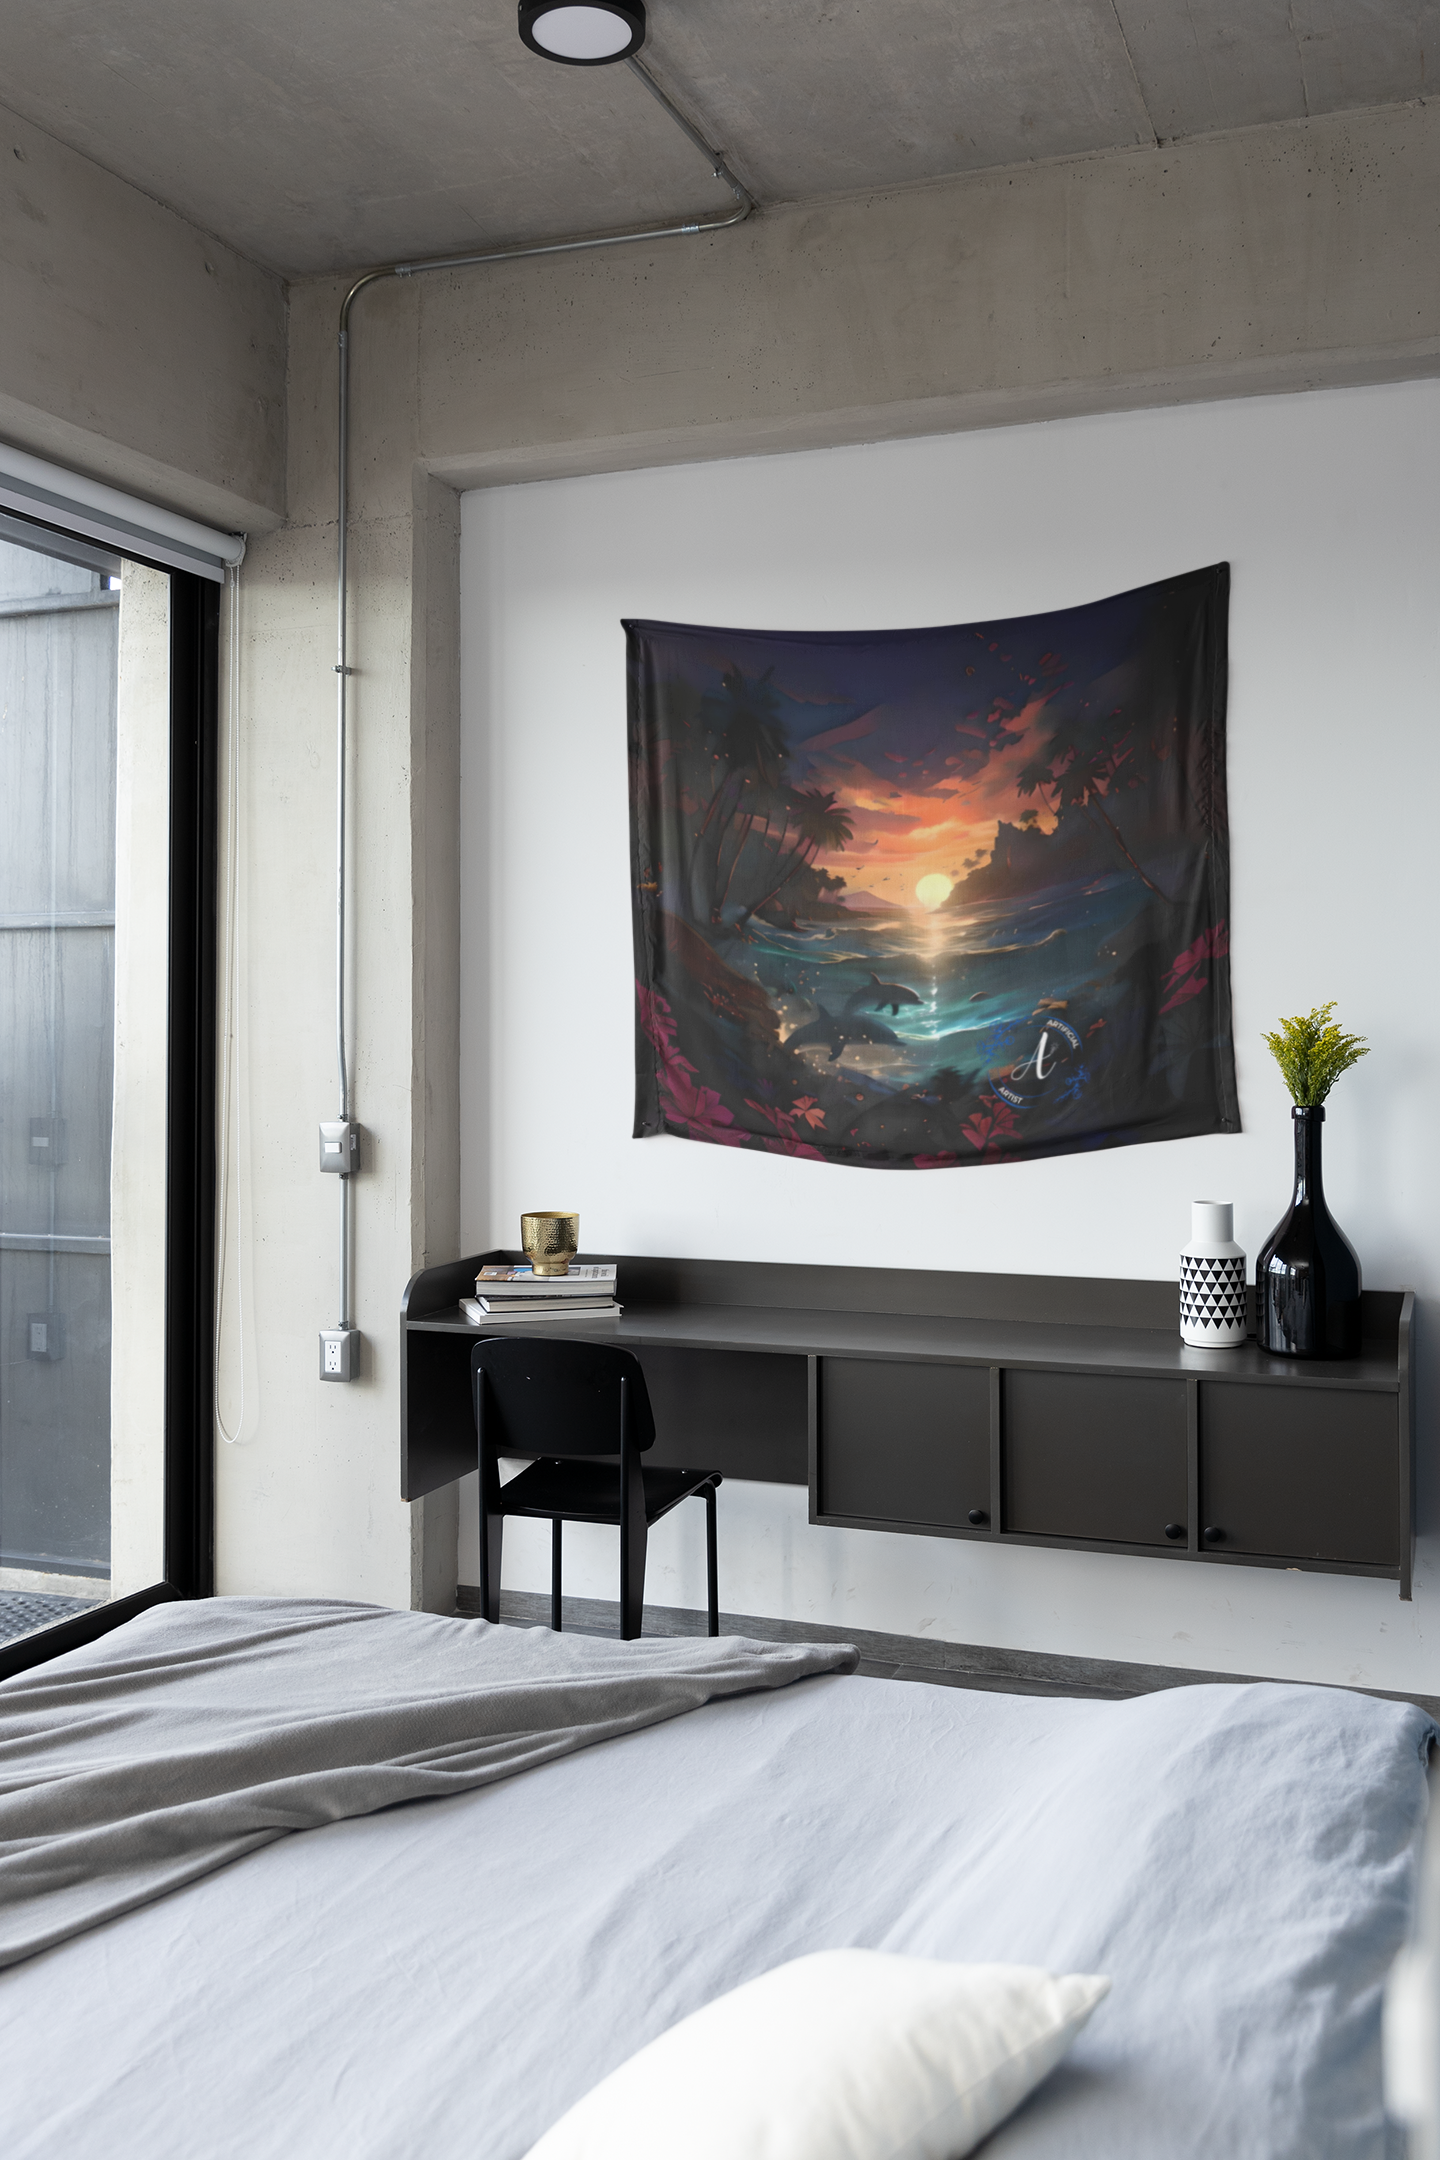 Sunset Dolphins - Indoor Wall Tapestry